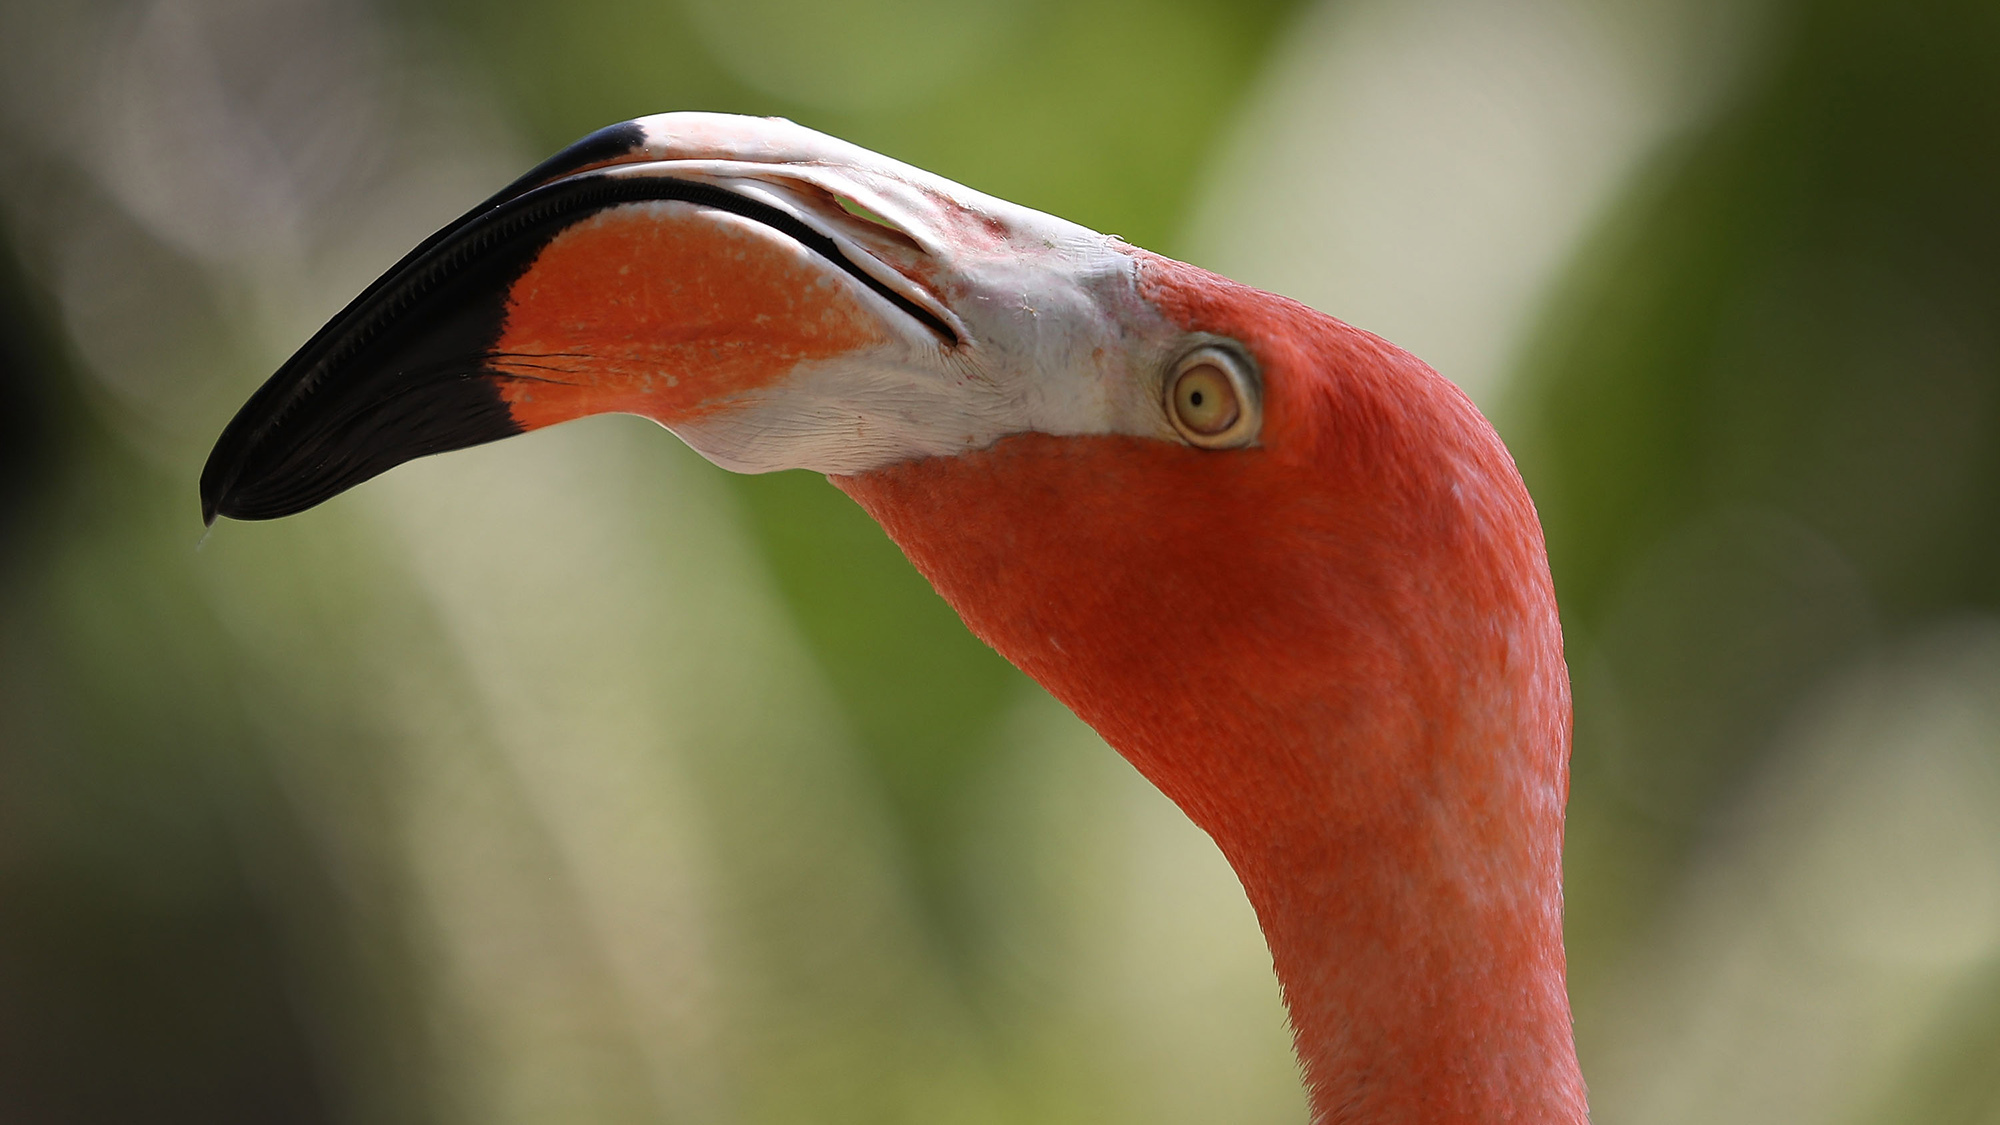 an american flamingo. the bird has pink and white plumage with a black beak